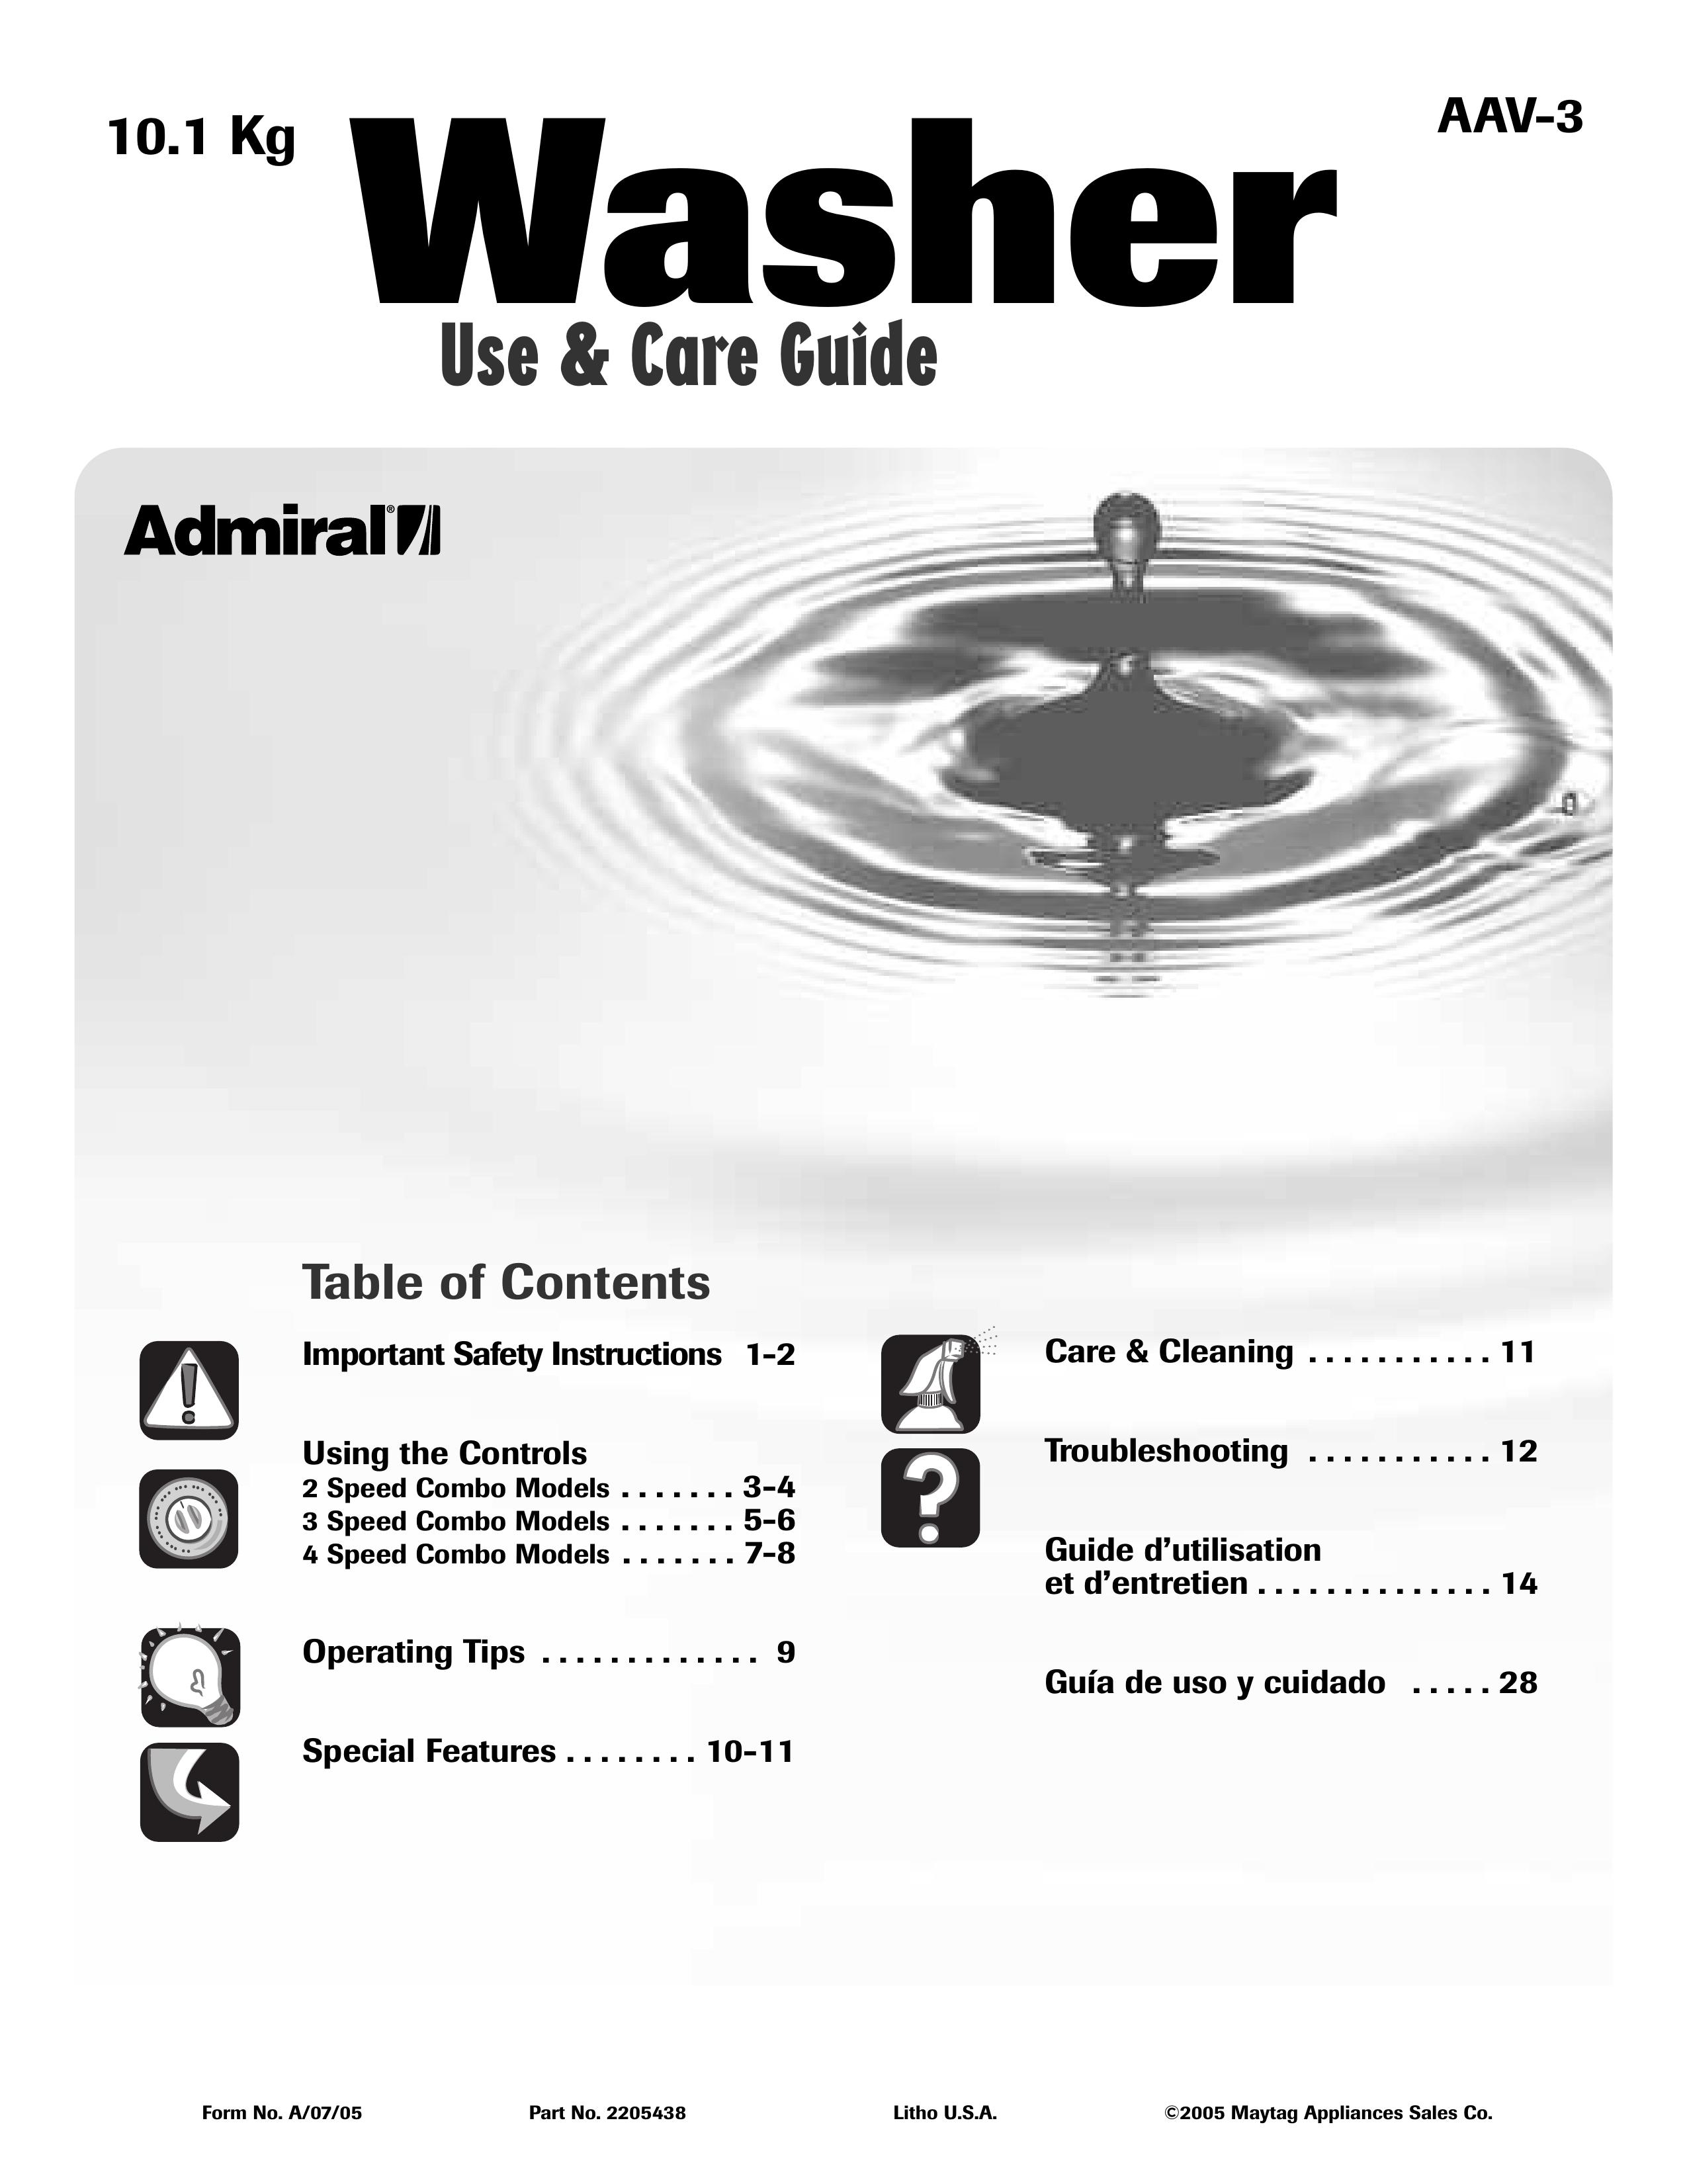 Admiral AAV-3 Washer User Manual (Page 1)